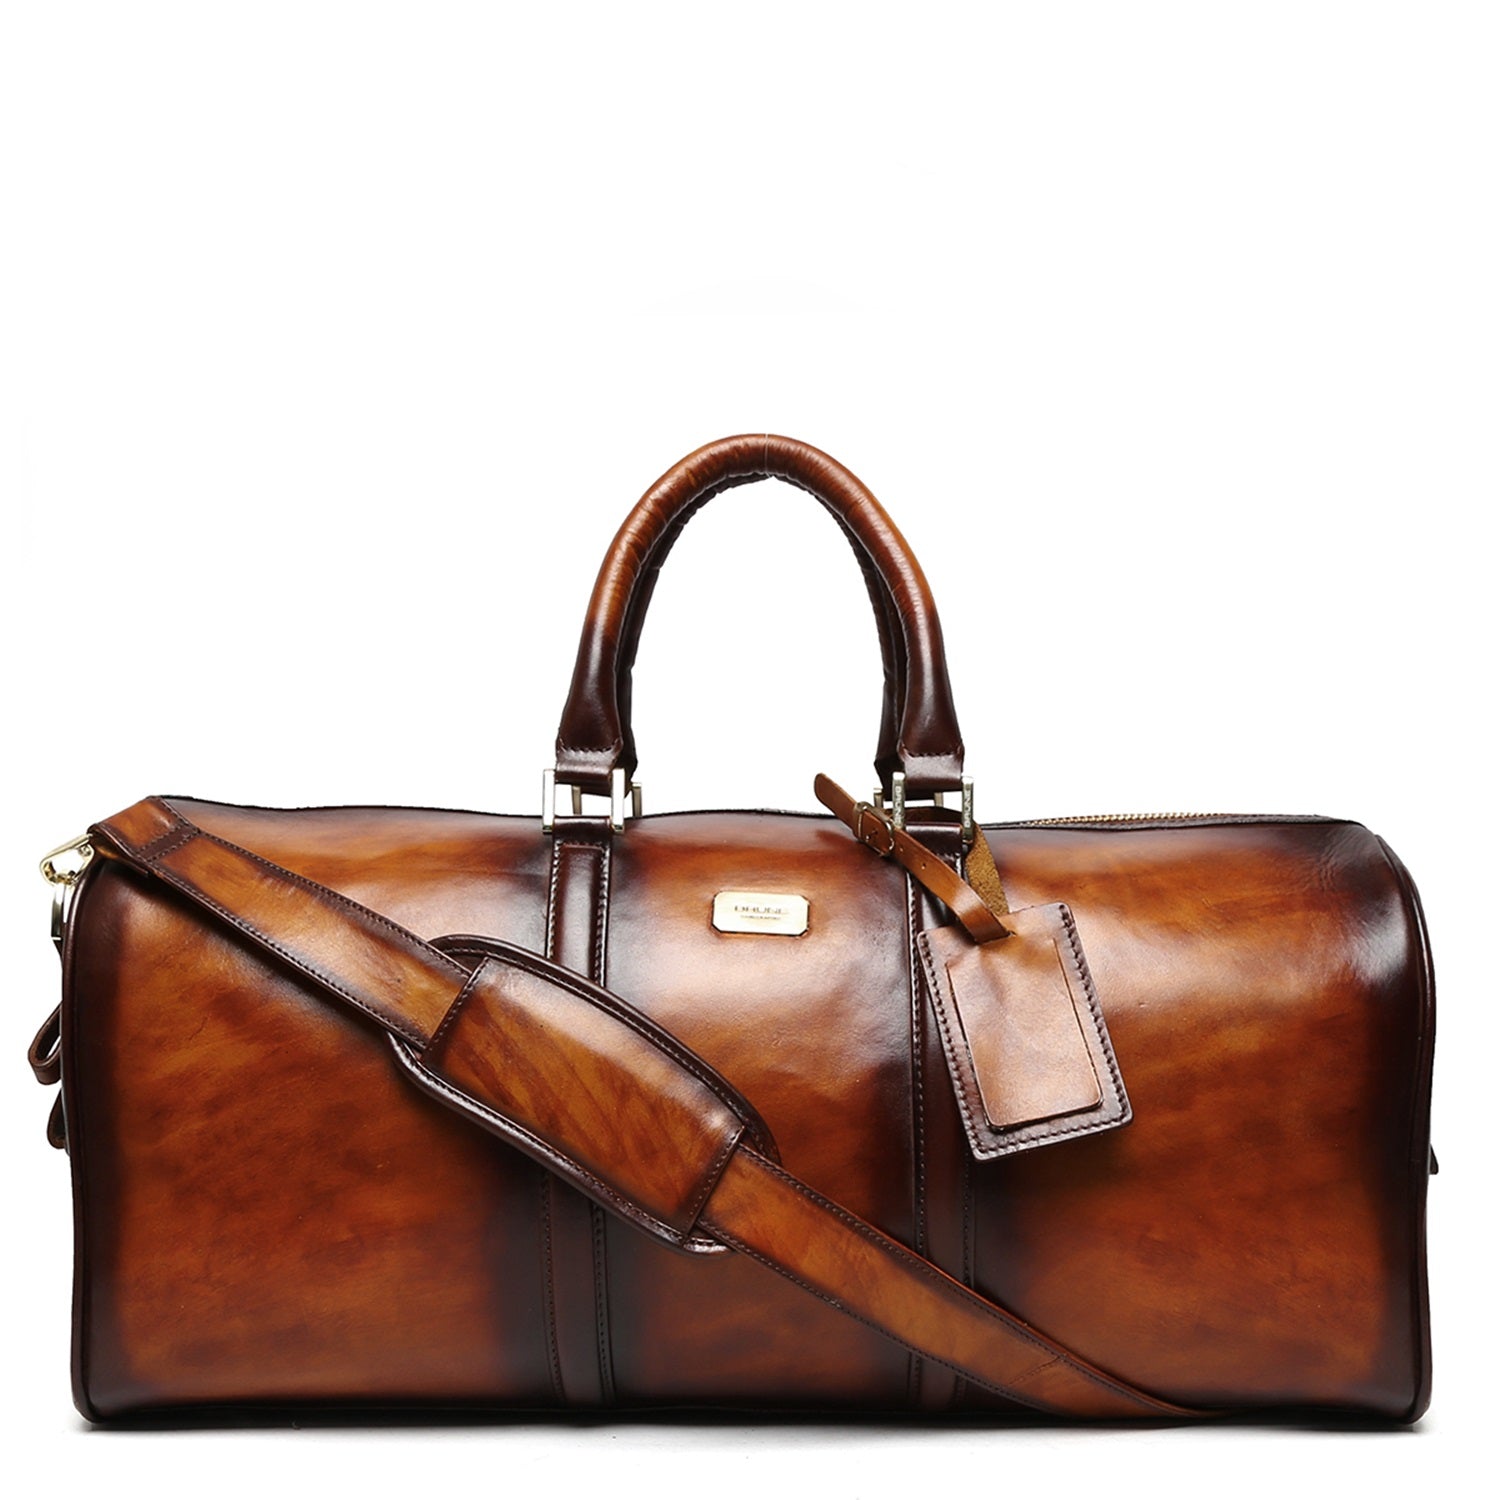 Brune & Bareskin Veg Tanned Tan Hand Painted Leather Duffle Bag With Golden Accent